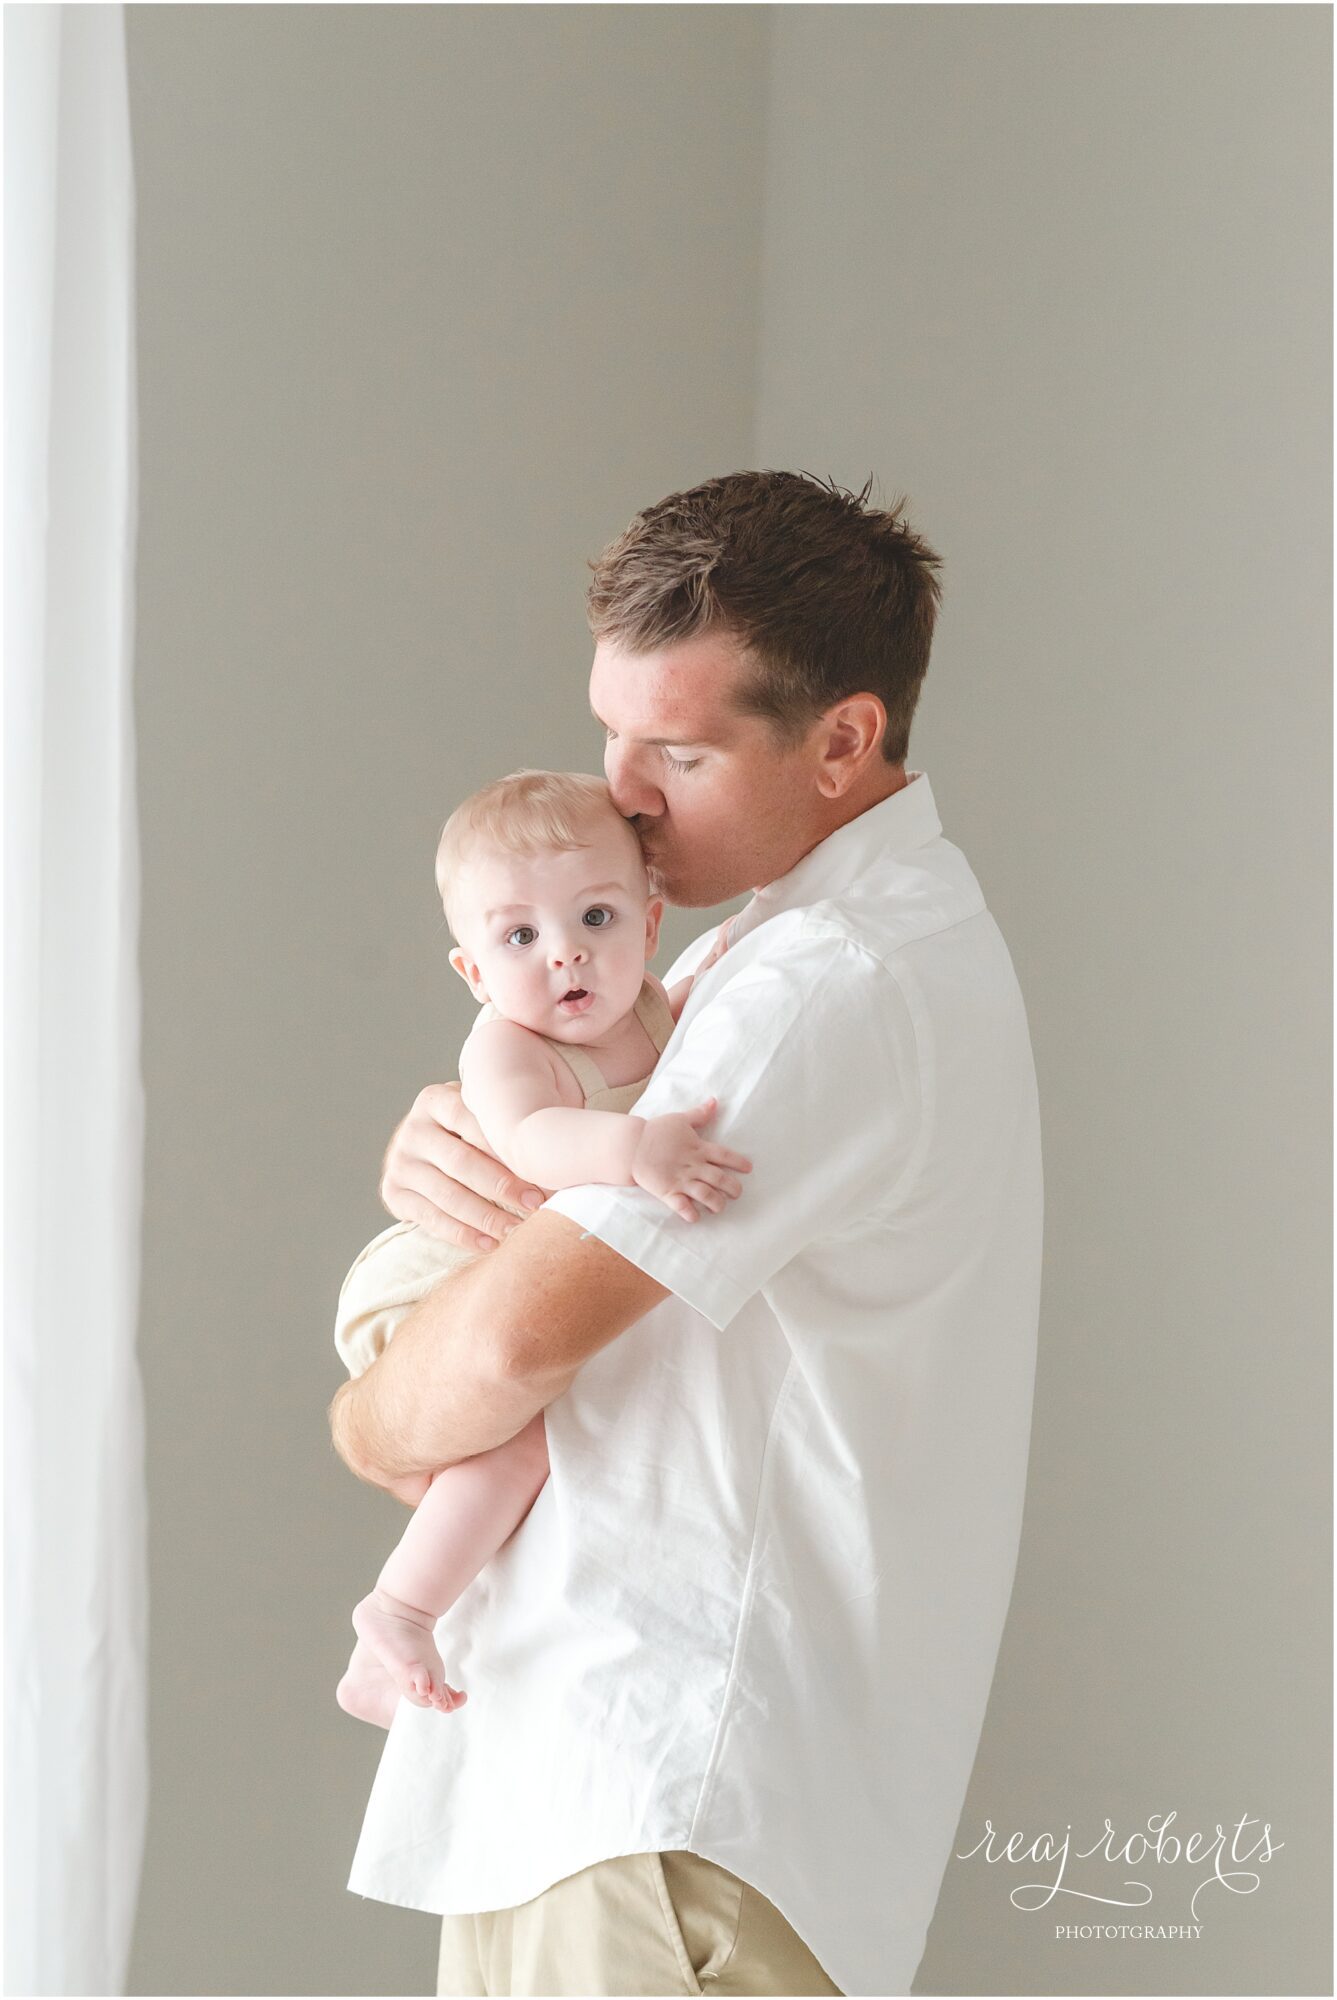 Father wearing white shirt kissing 6 month old son wearing tan romper | Reaj Roberts Photography